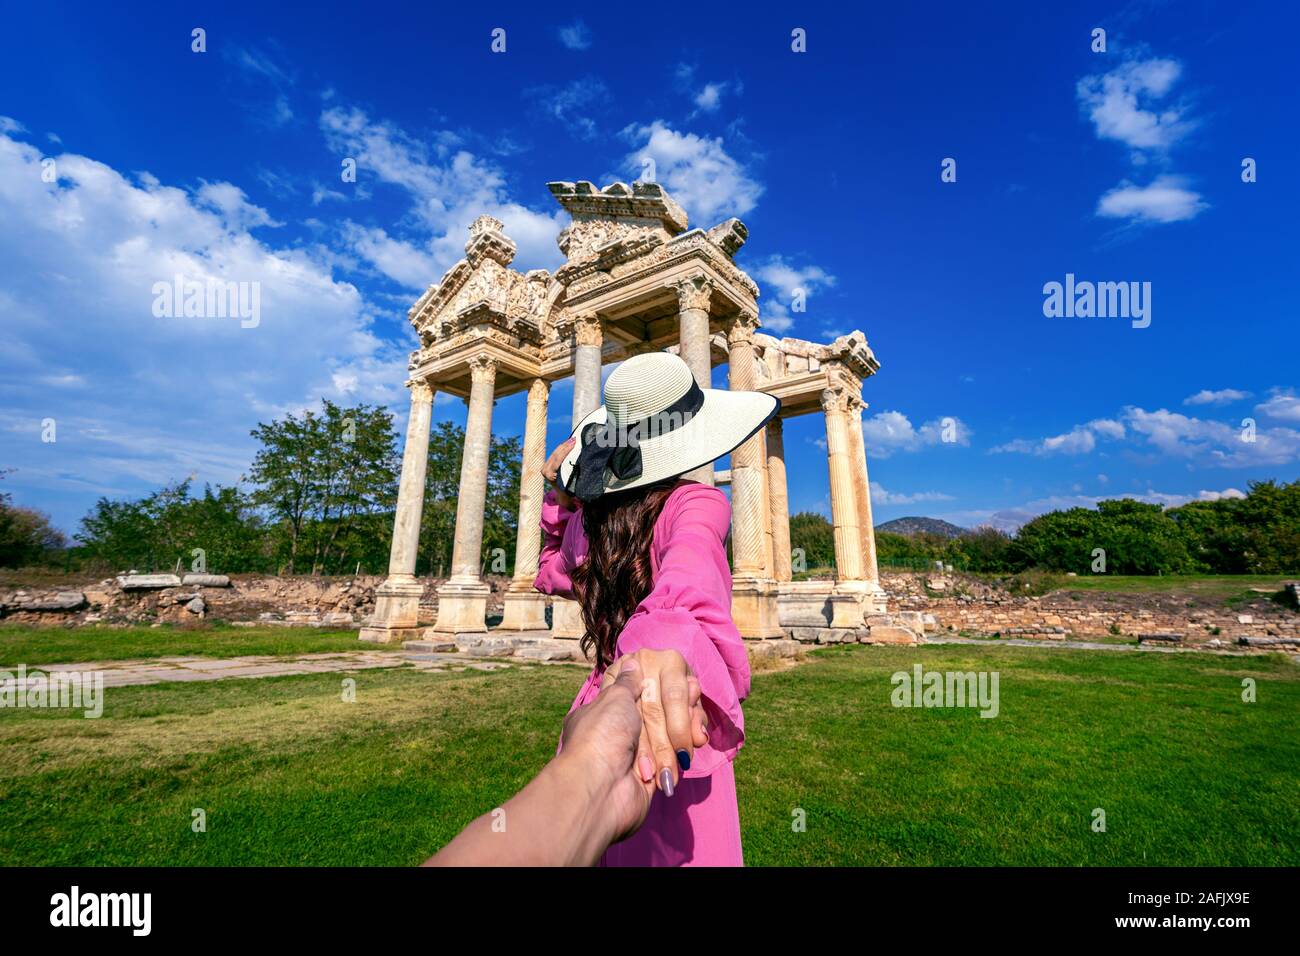 Women tourists holding man's hand and leading him to Aphrodisias ancient city in Turkey. Stock Photo